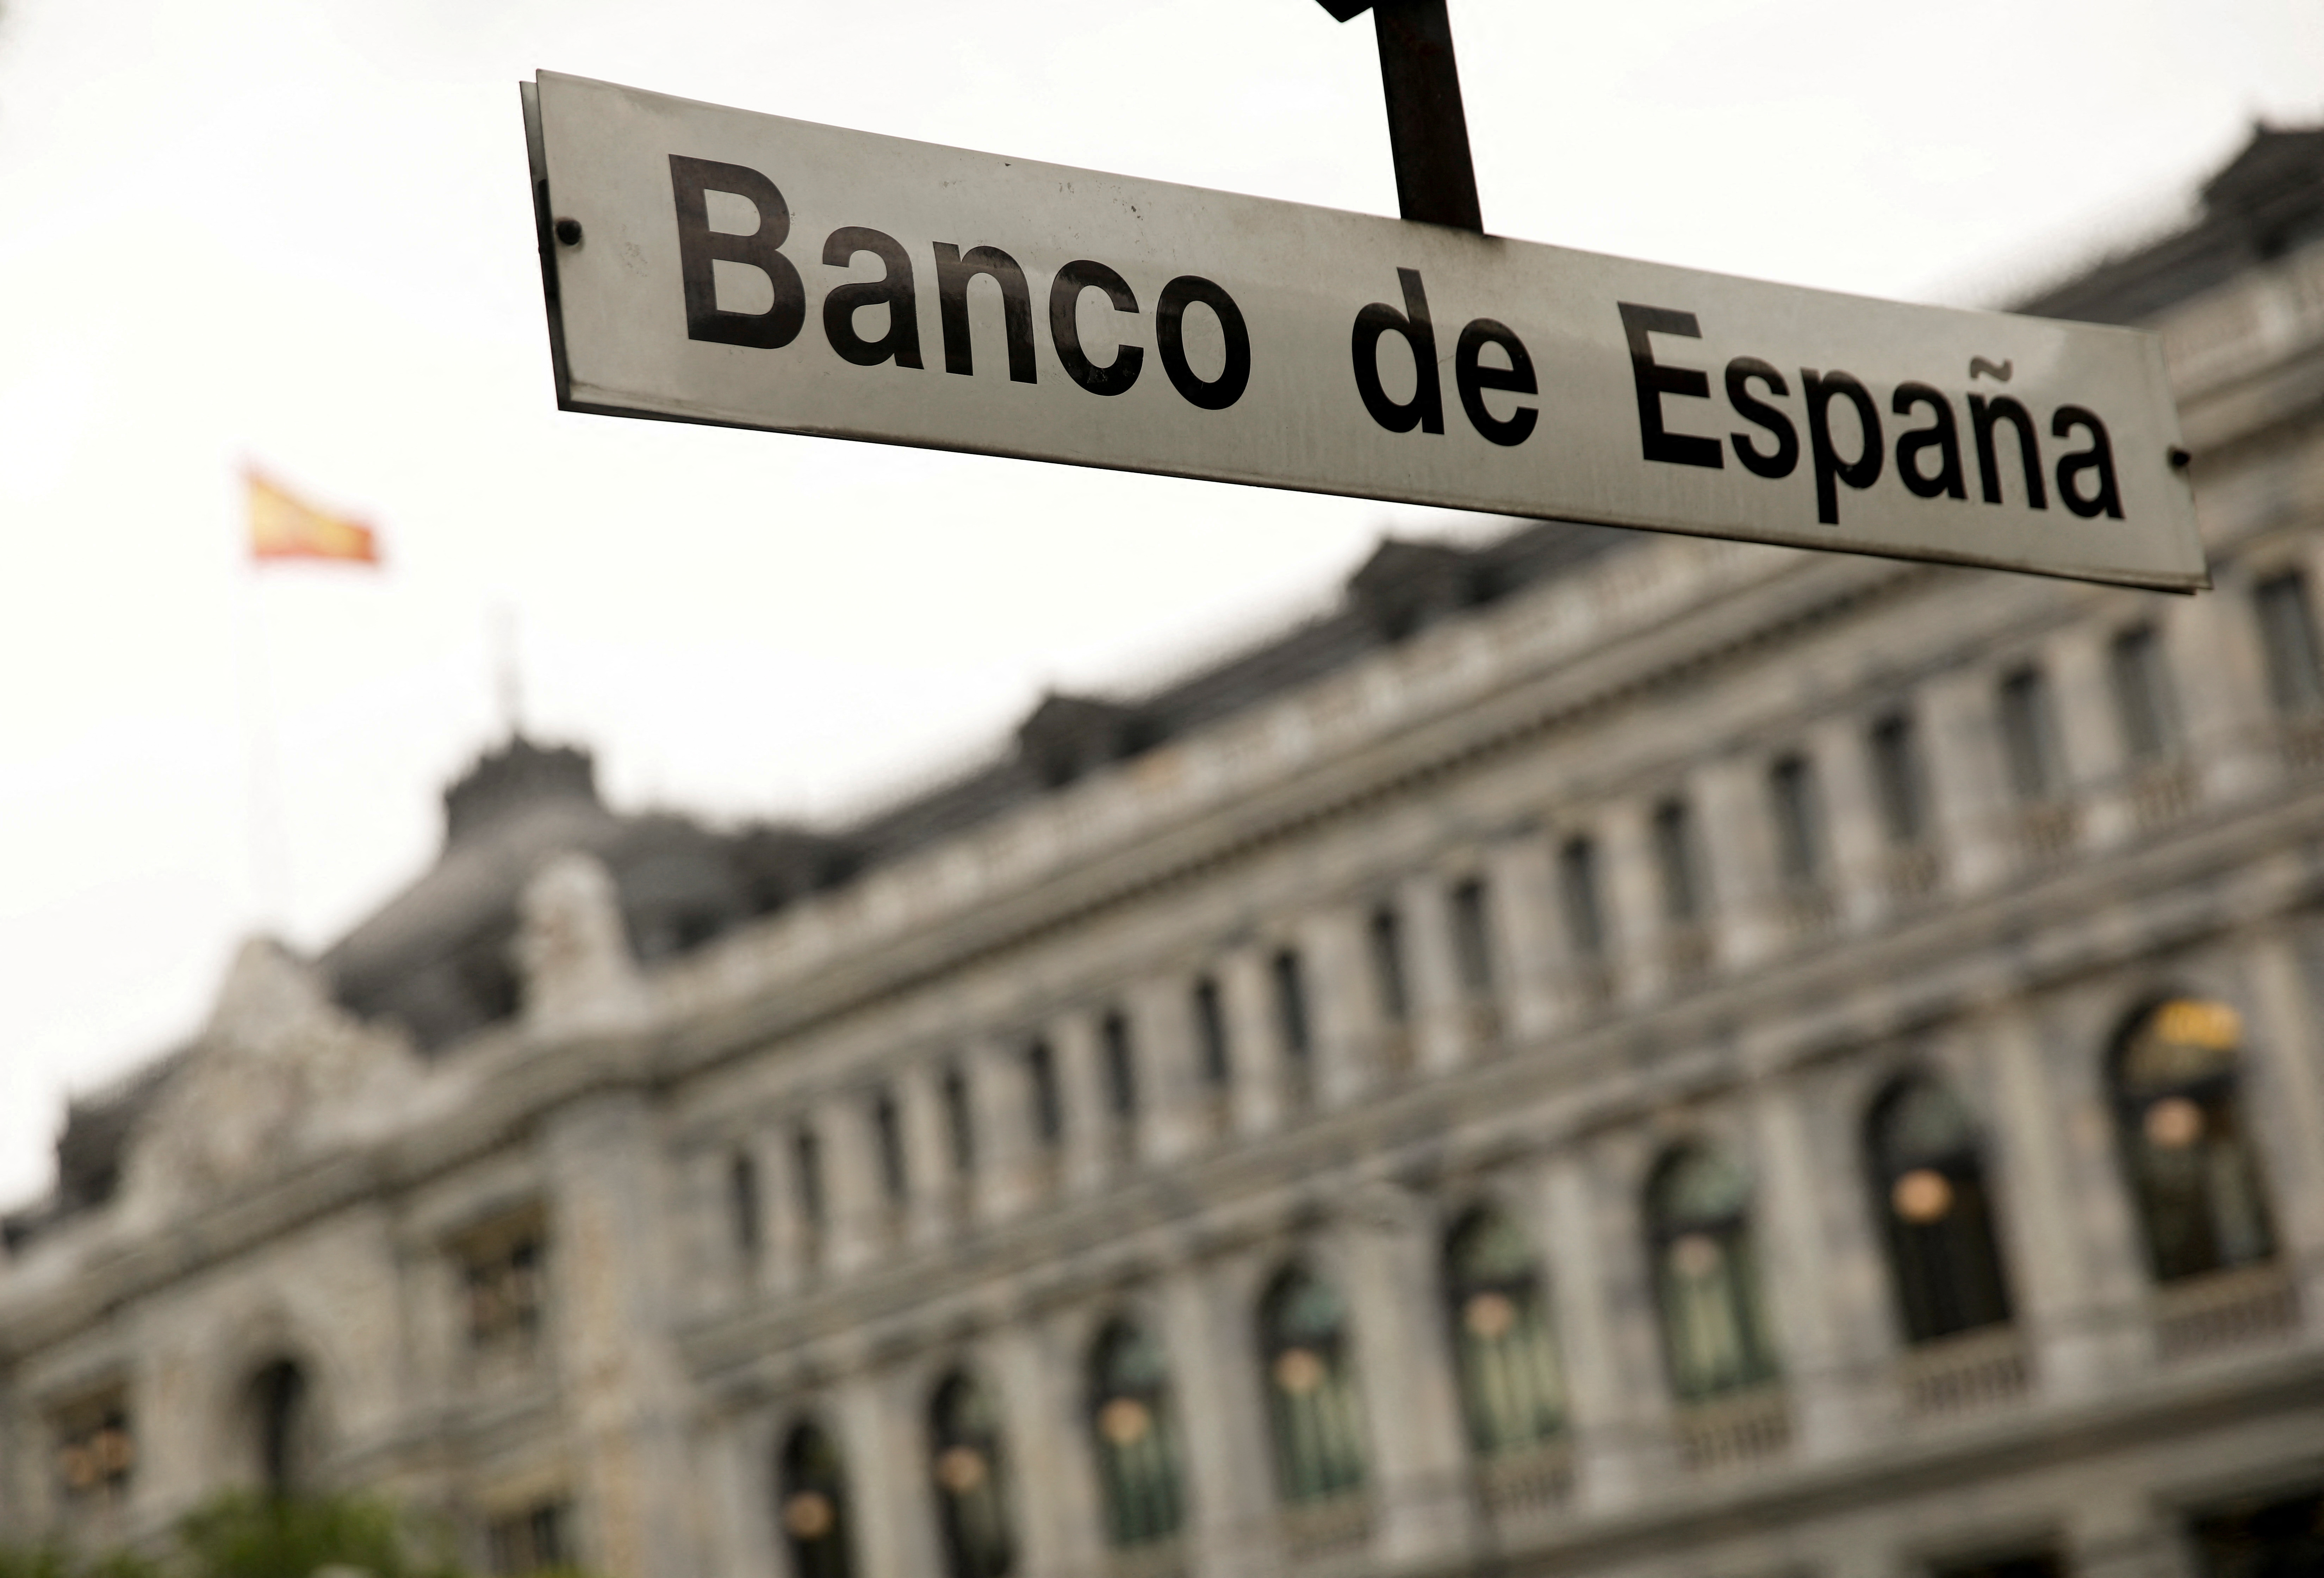 The metro station of Bank of Spain is seen in front of the Bank of Spain building in Madrid